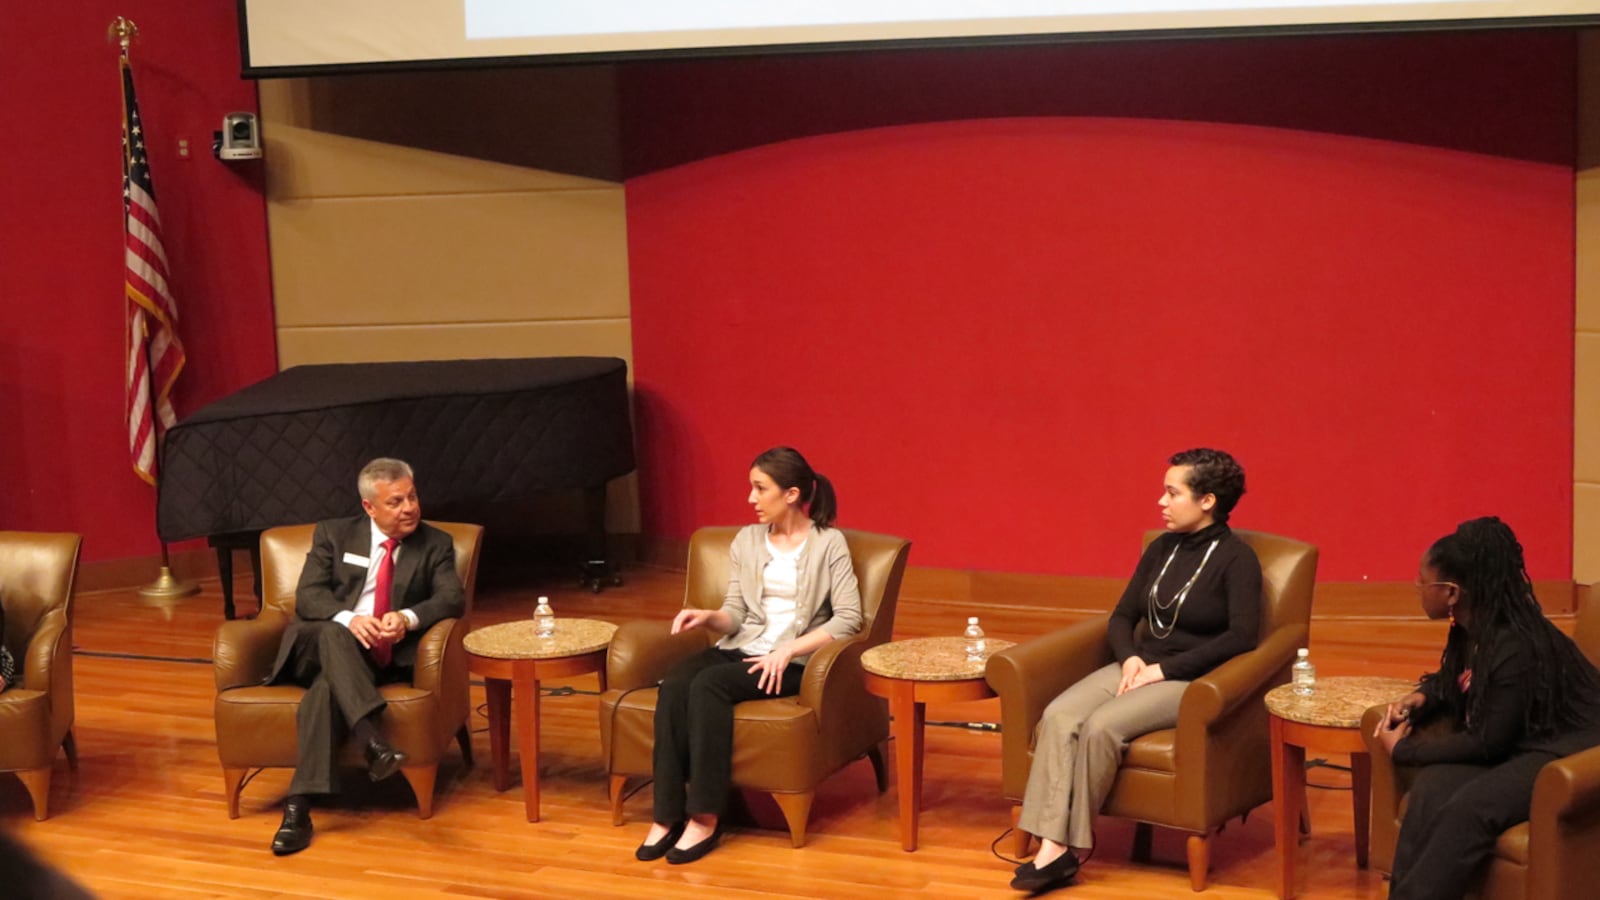 Dean Gerardo Gonzalez, of Indiana University's College of Education, and teachers Natalie Merz, Adriana Rivera and Tayana Dowdell discussed teacher preparation and the realities of teachers' jobs at an event Tuesday night.